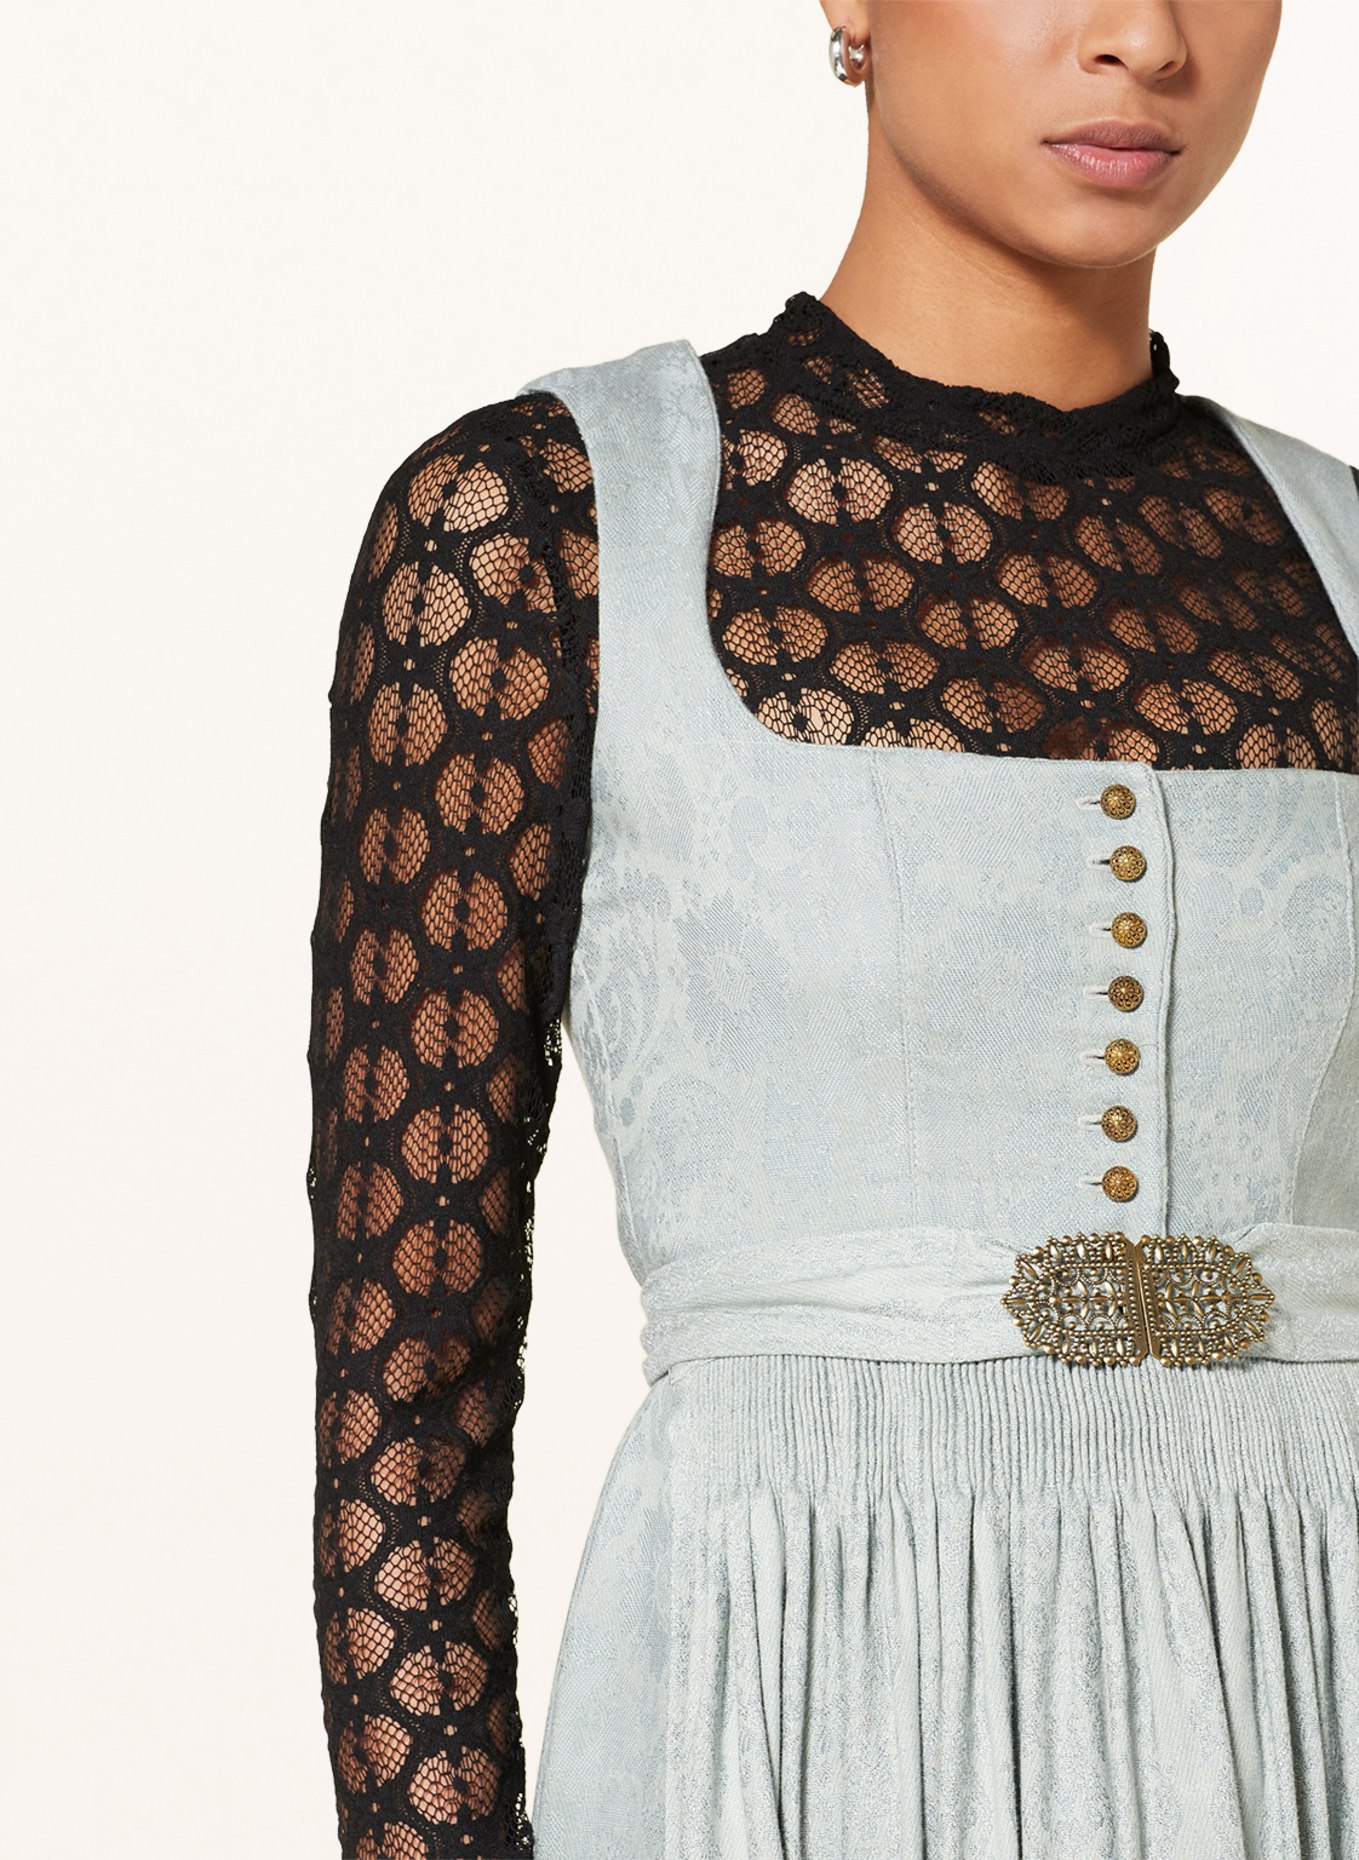 BERWIN & WOLFF Dirndl blouse made of lace, Color: BLACK (Image 3)